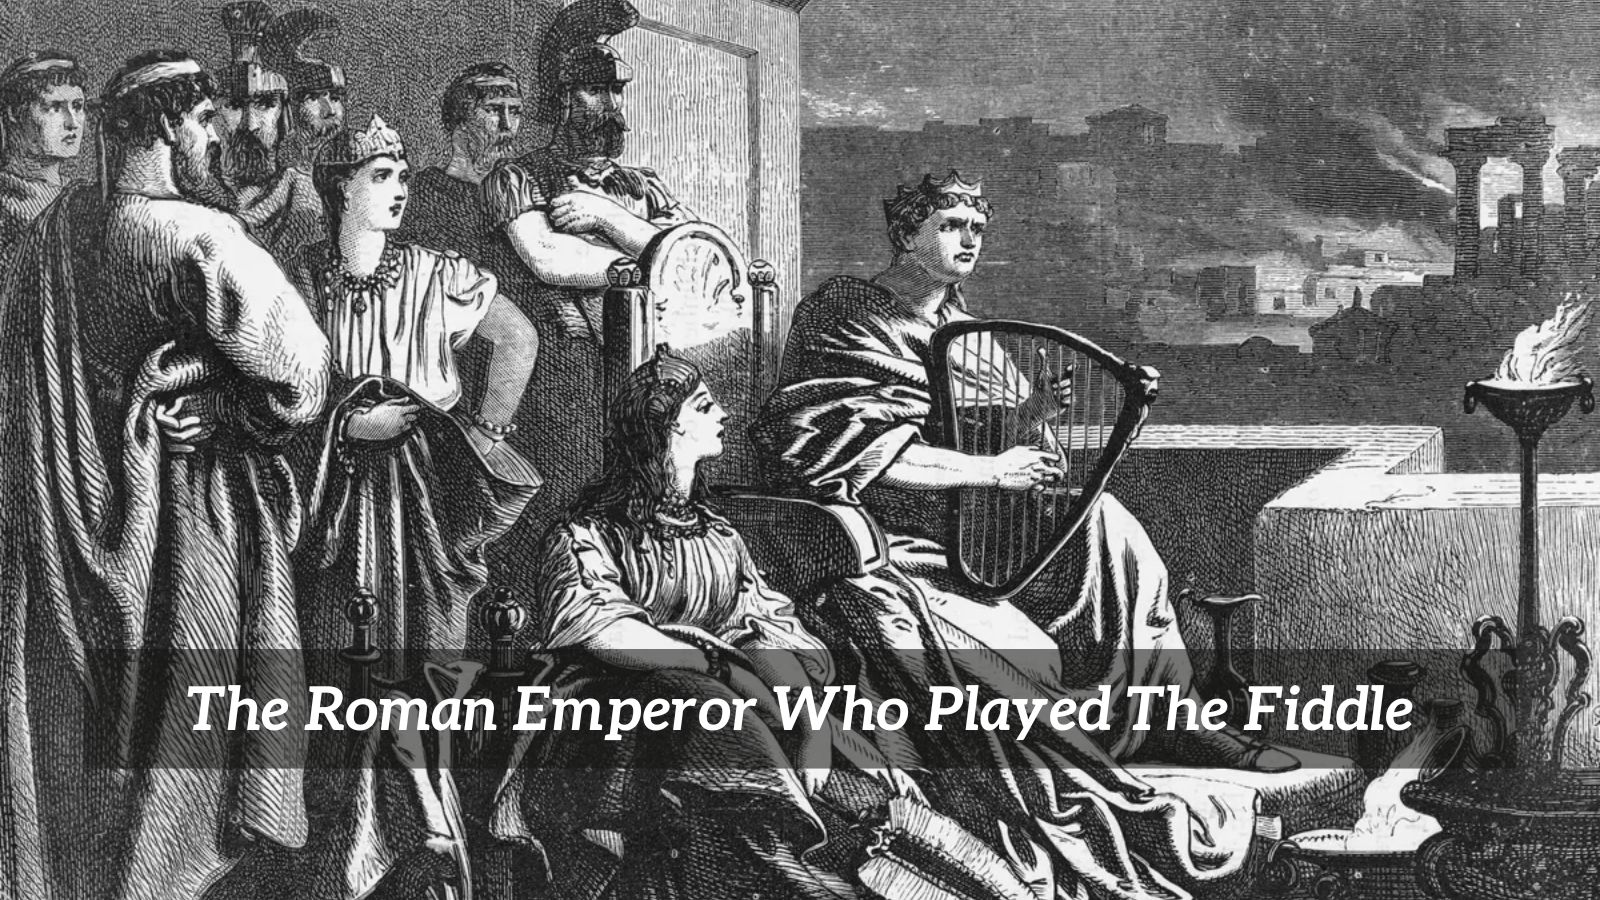 The Roman Emperor Who Played The Fiddle